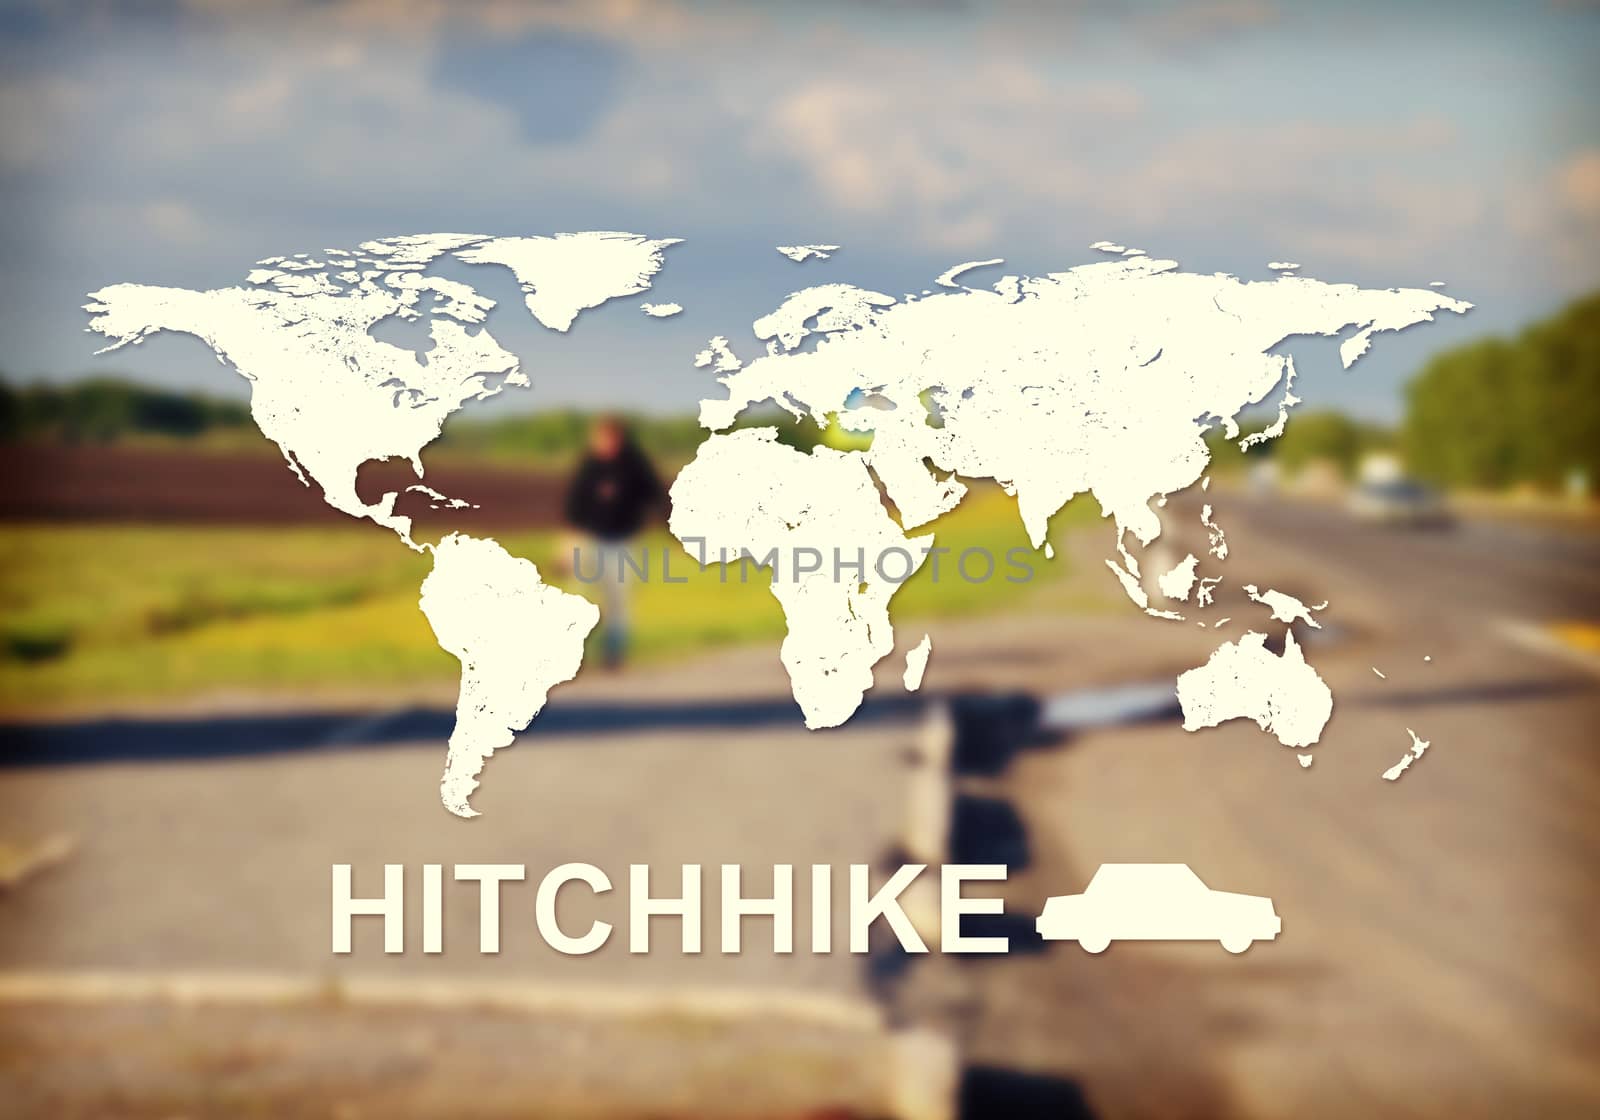 Contoured map of world continents with inscription Hitchhike and related symbol. Blurred photo of forked road with cars, trees and person by the side of the road as backdrop